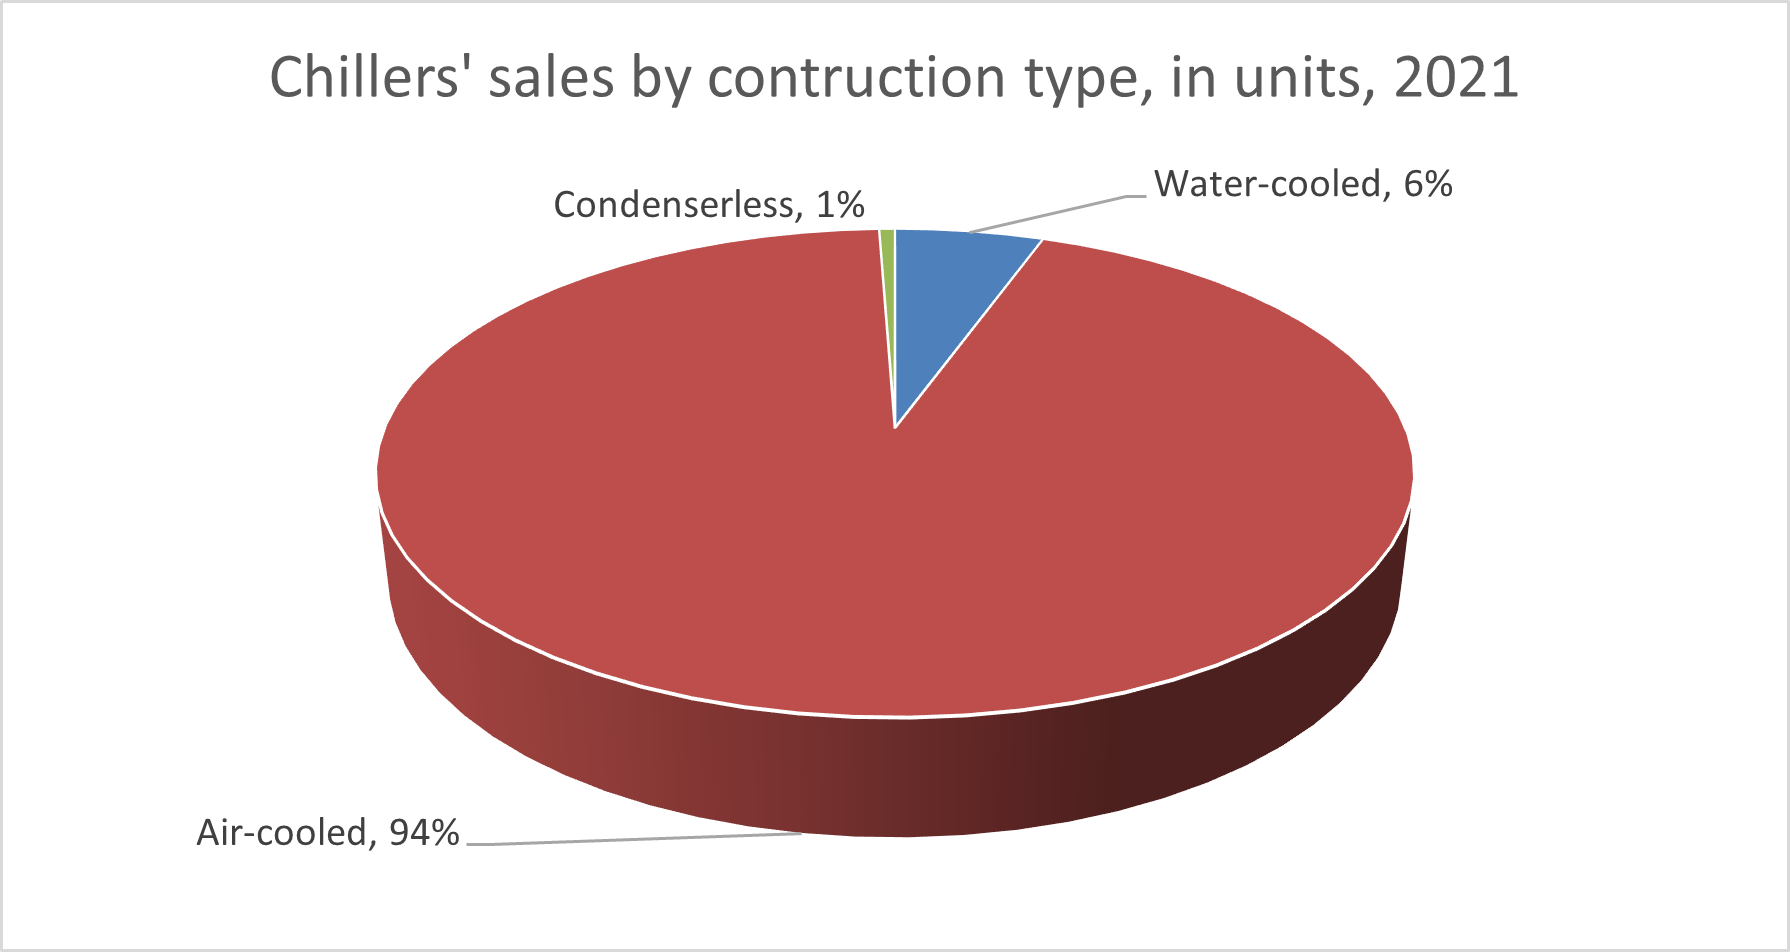 Chiller sales by construction type, EU 28 – 2021, from Eurovent Market intelligence